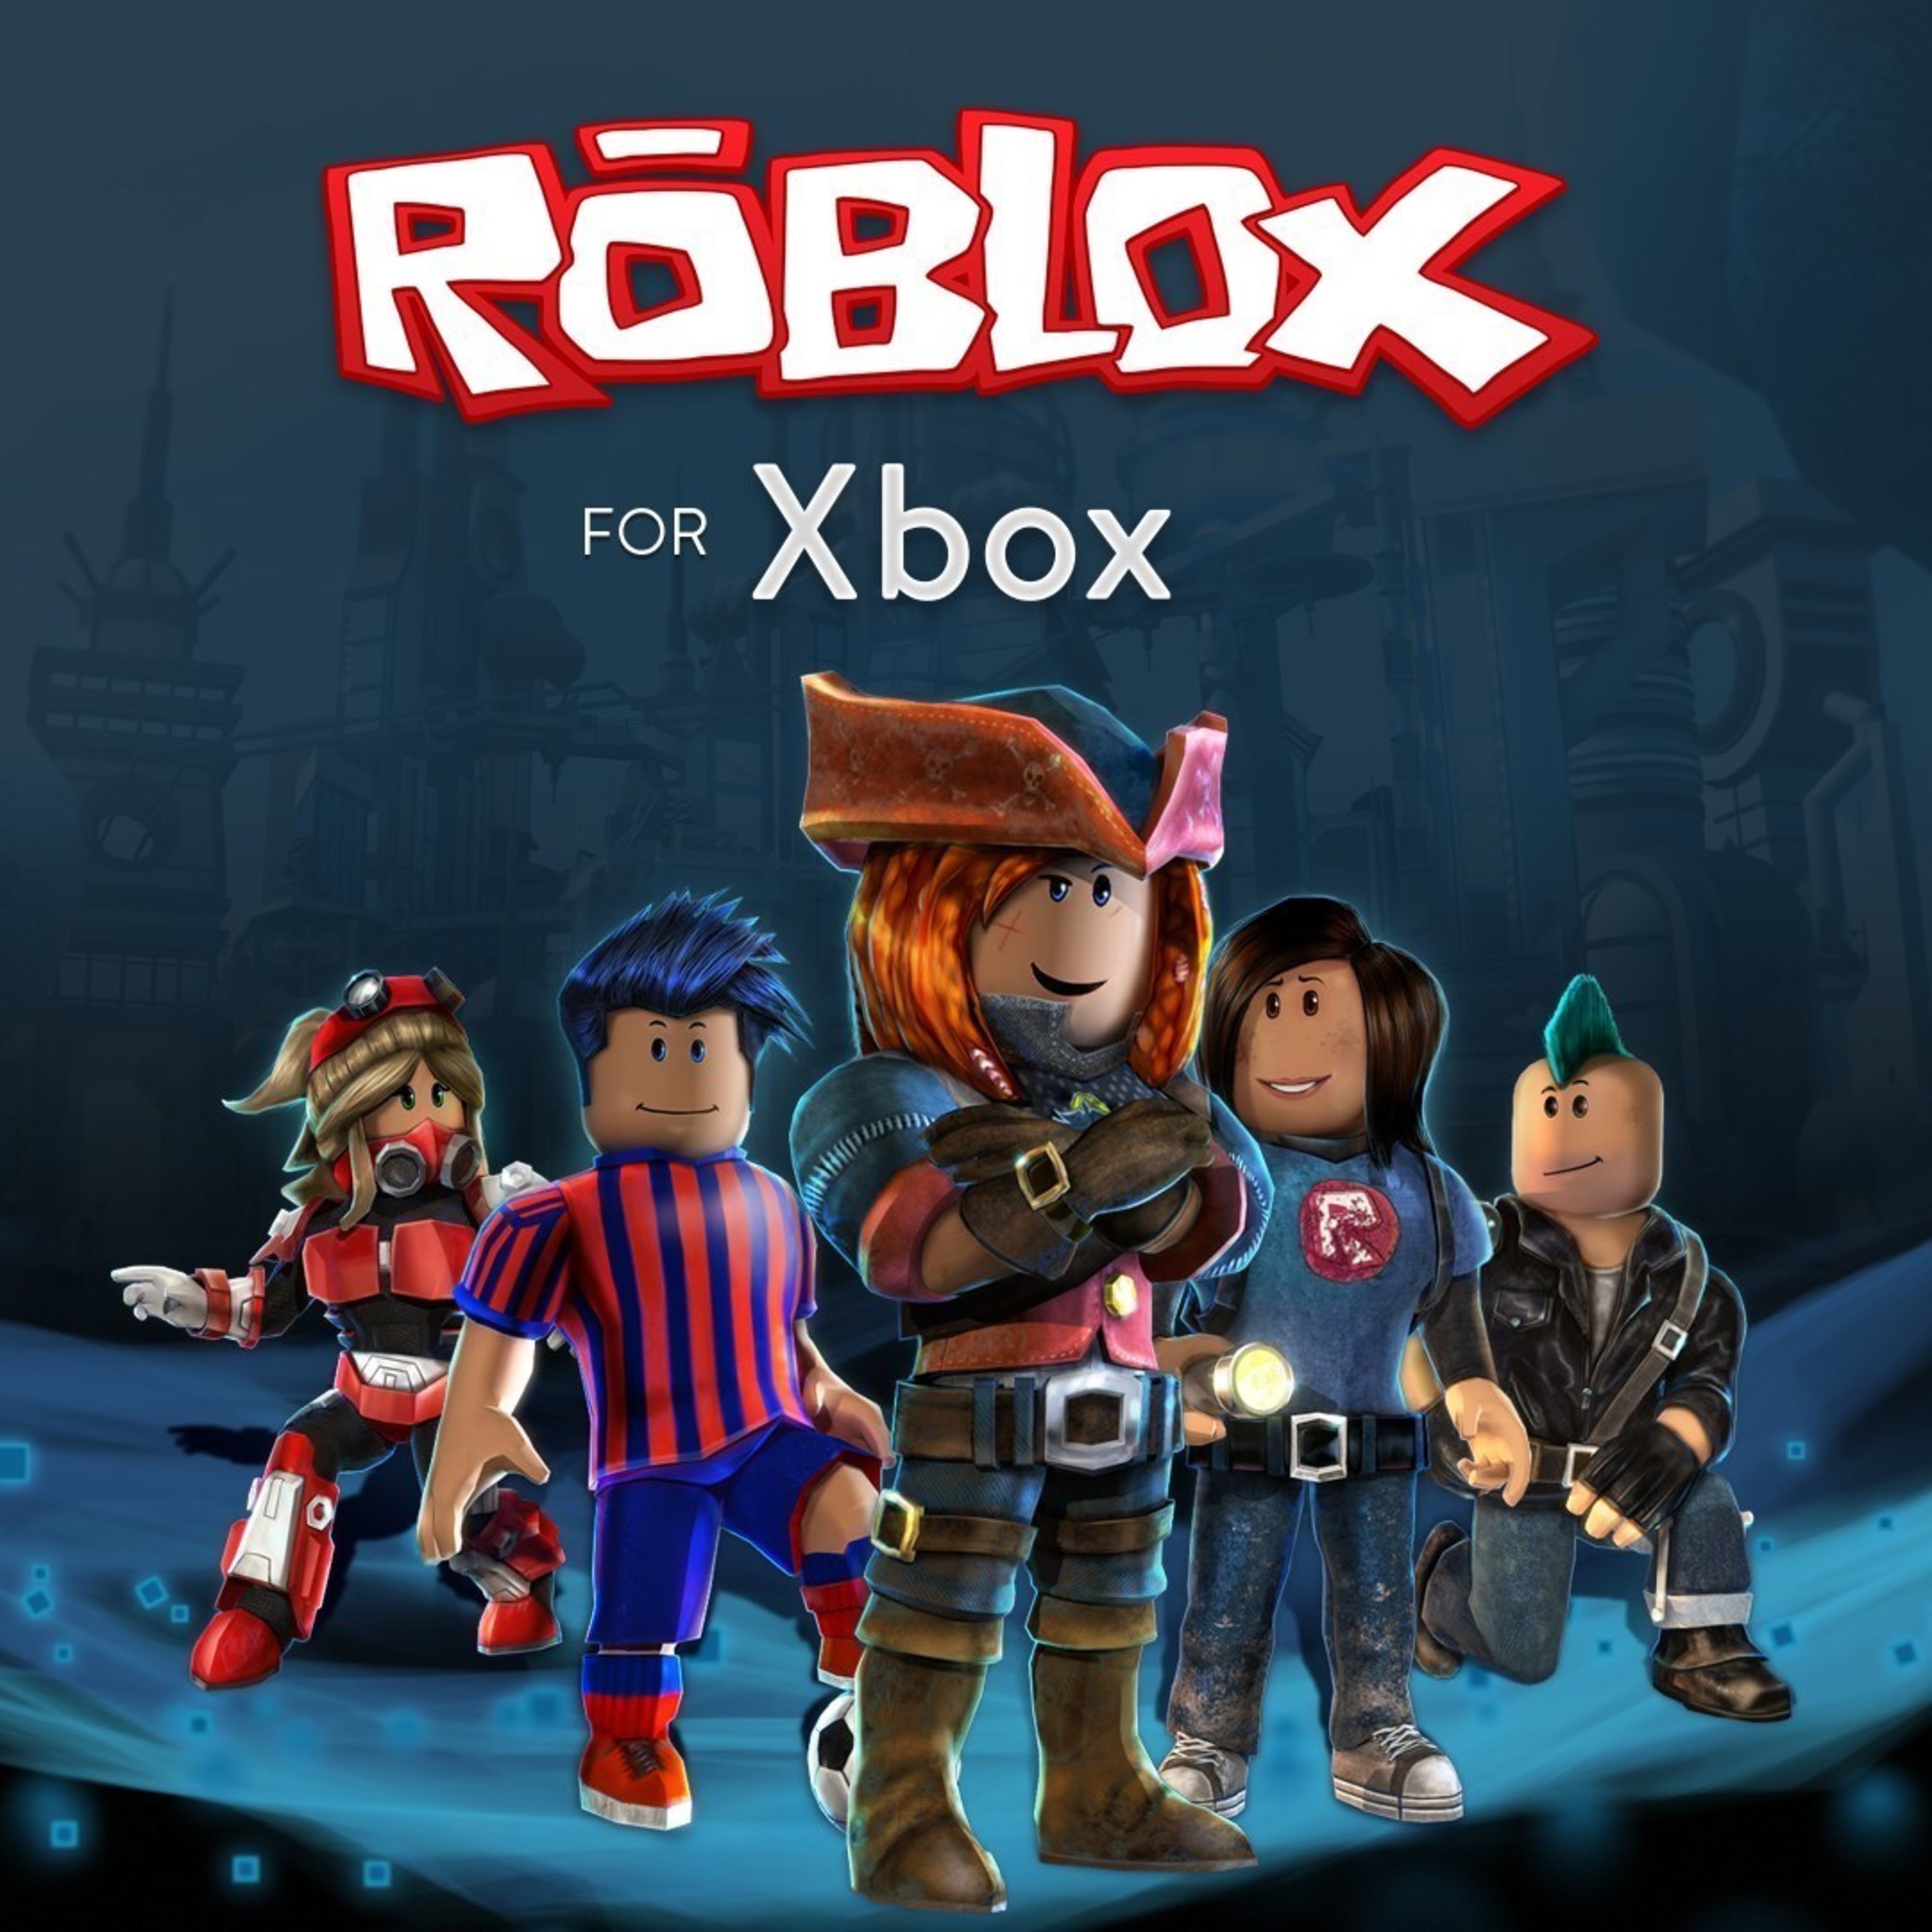 Community Creations Roblox Wiki - roblox guest glitch roblox 22500 robux code